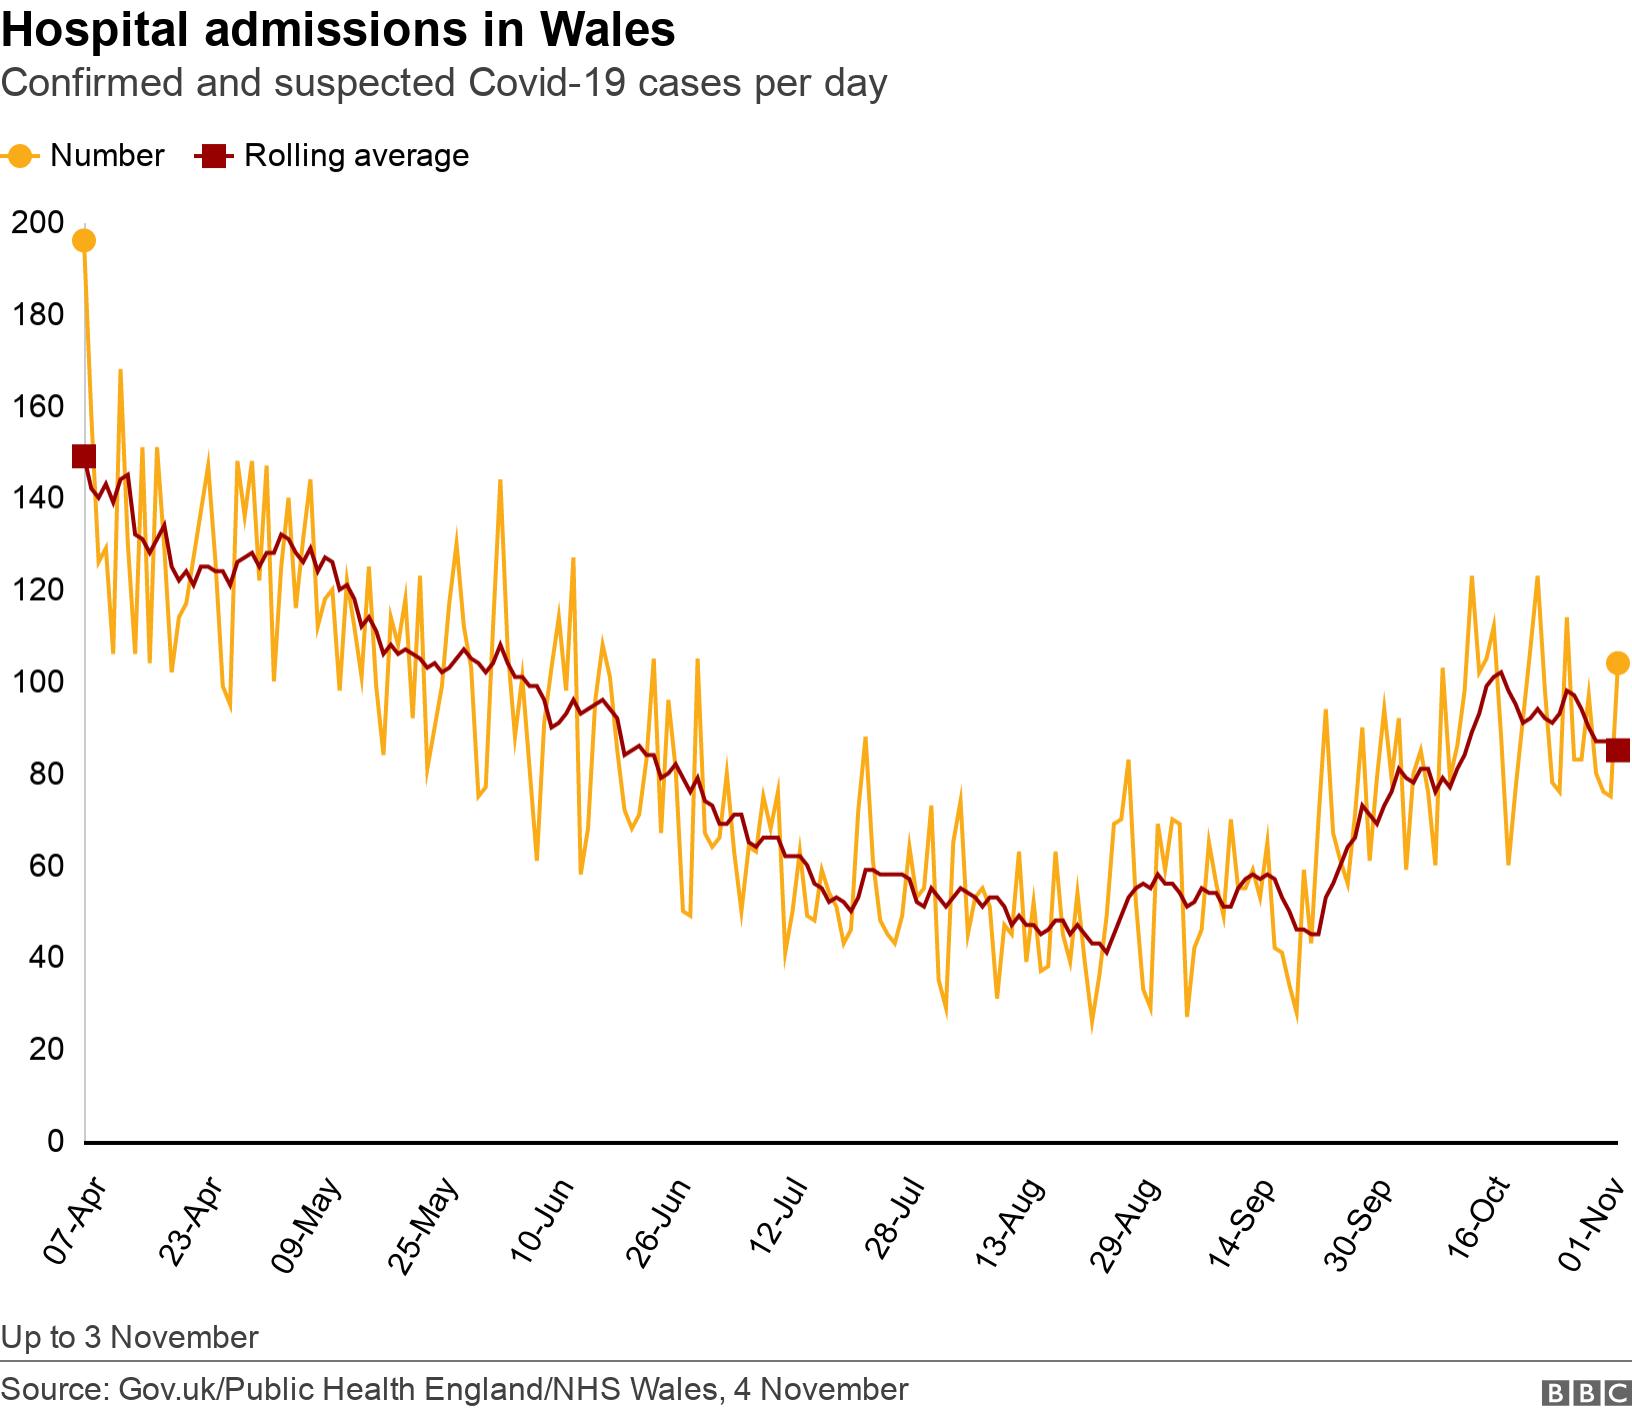 Hospital admissions in Wales. Confirmed and suspected Covid-19 cases per day. Up to 3 November.